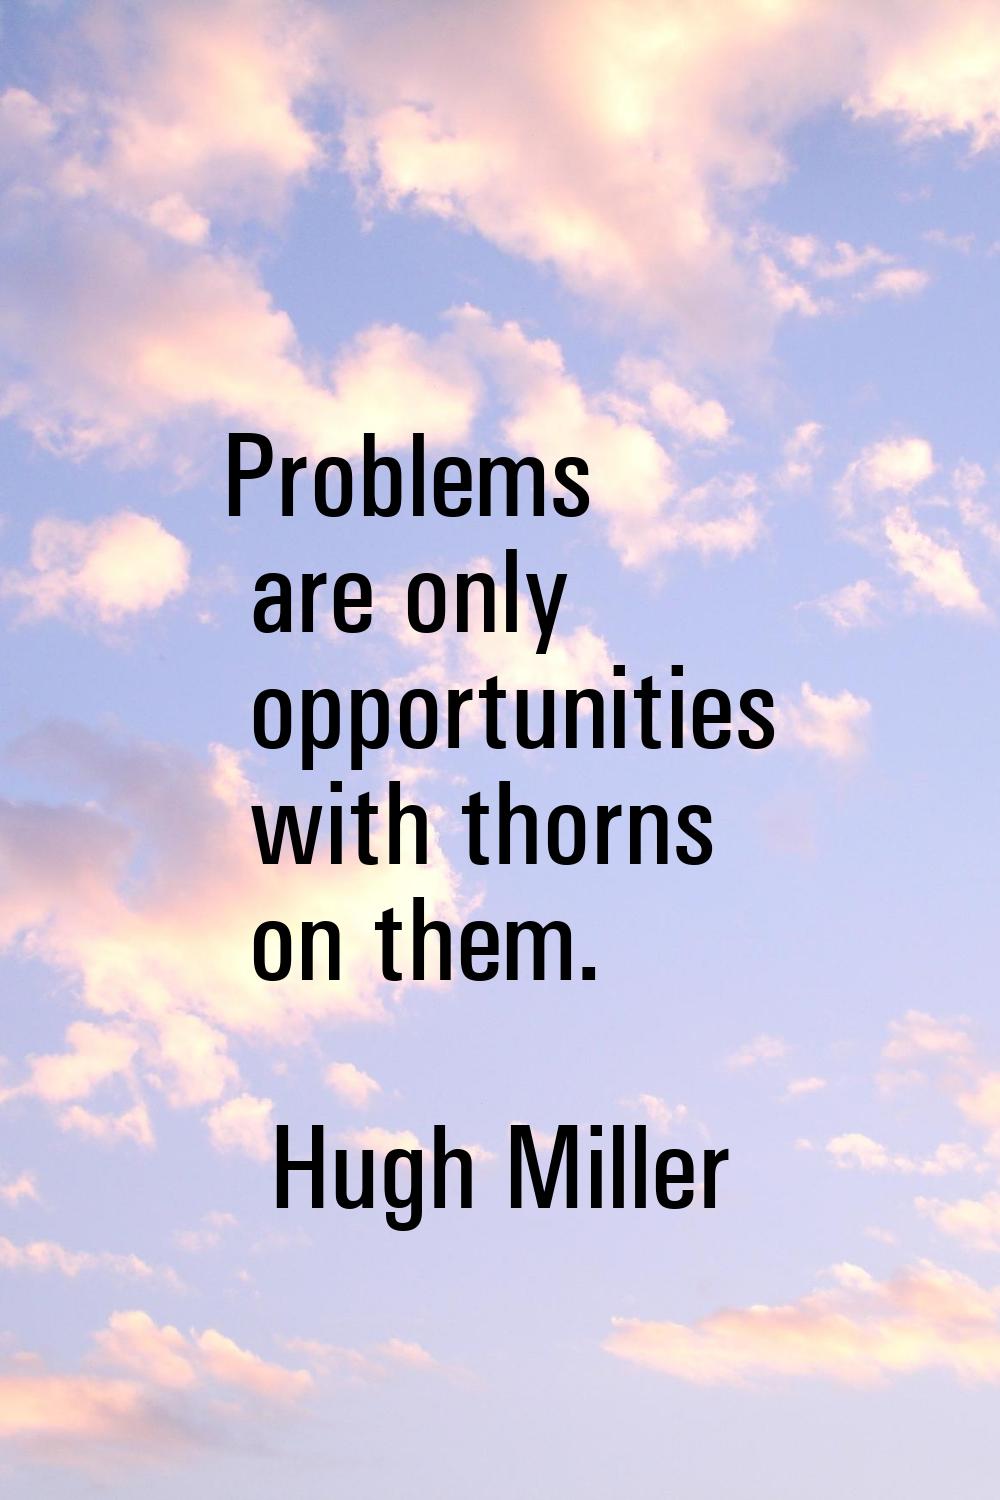 Problems are only opportunities with thorns on them.